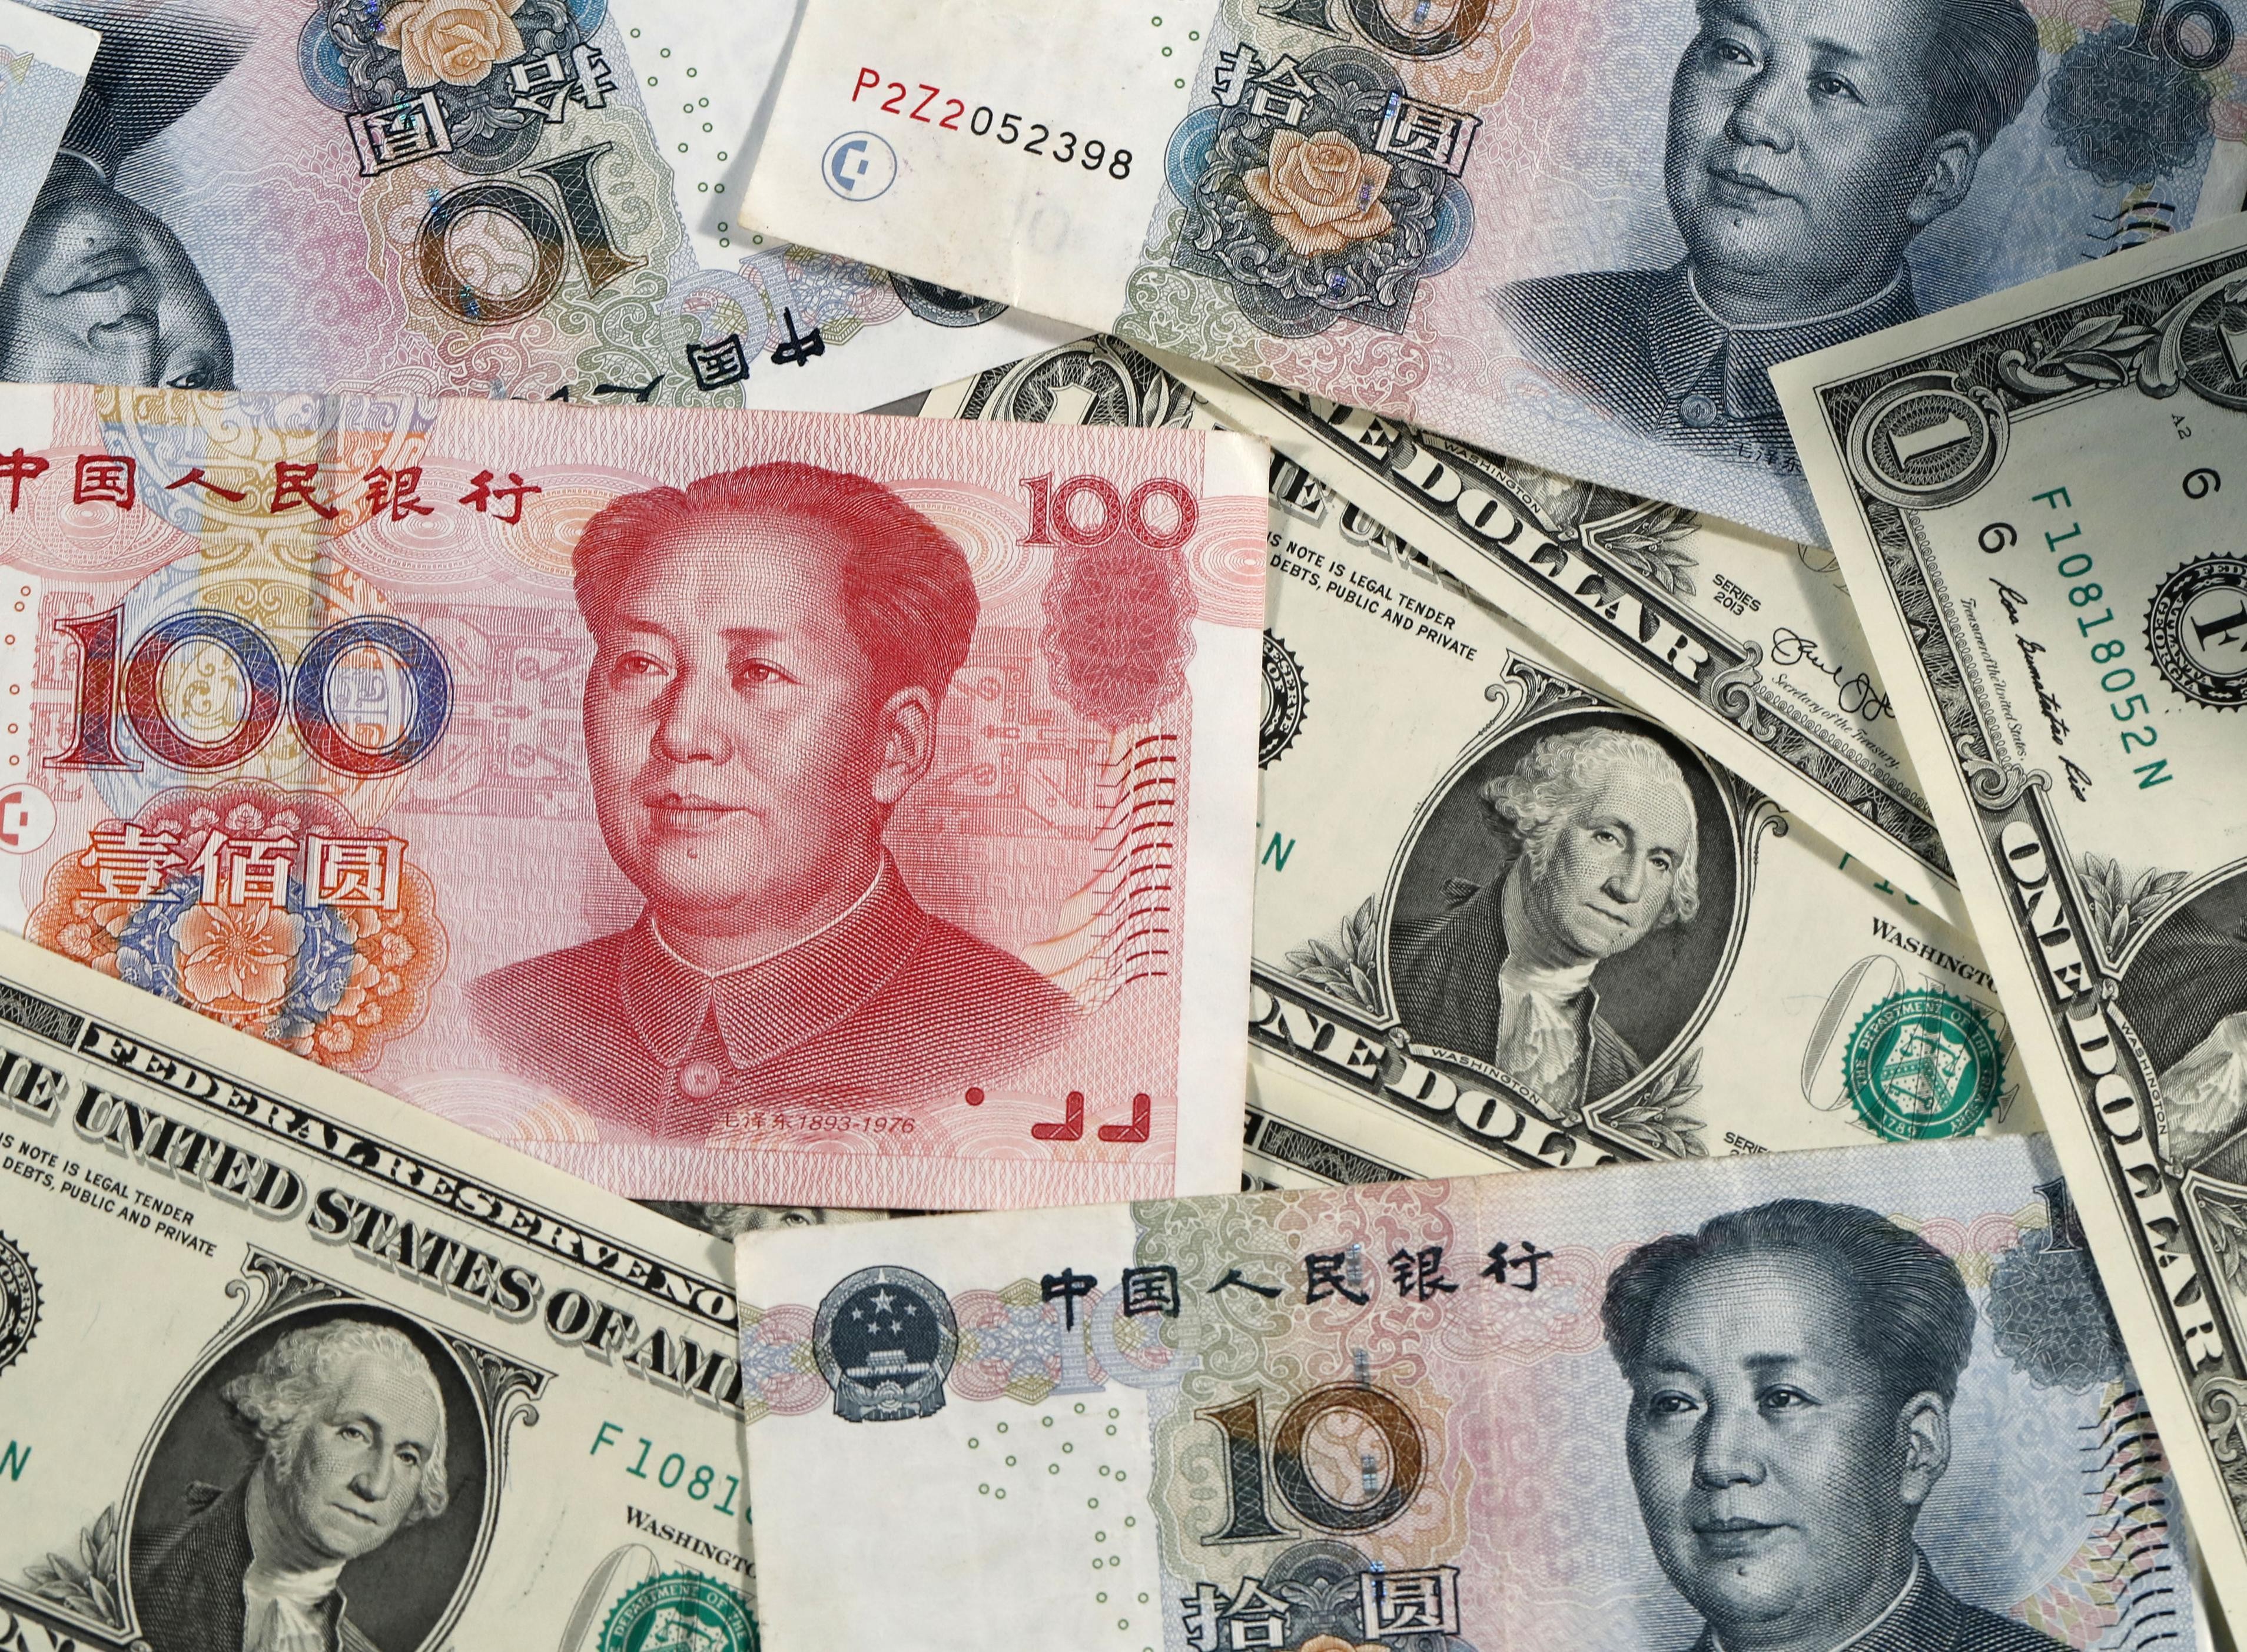 It is vital for Beijing to ensure the value of its US dollars – its main diplomatic tool for buying influence with low-interest loans and aid. Photo: Kyodo